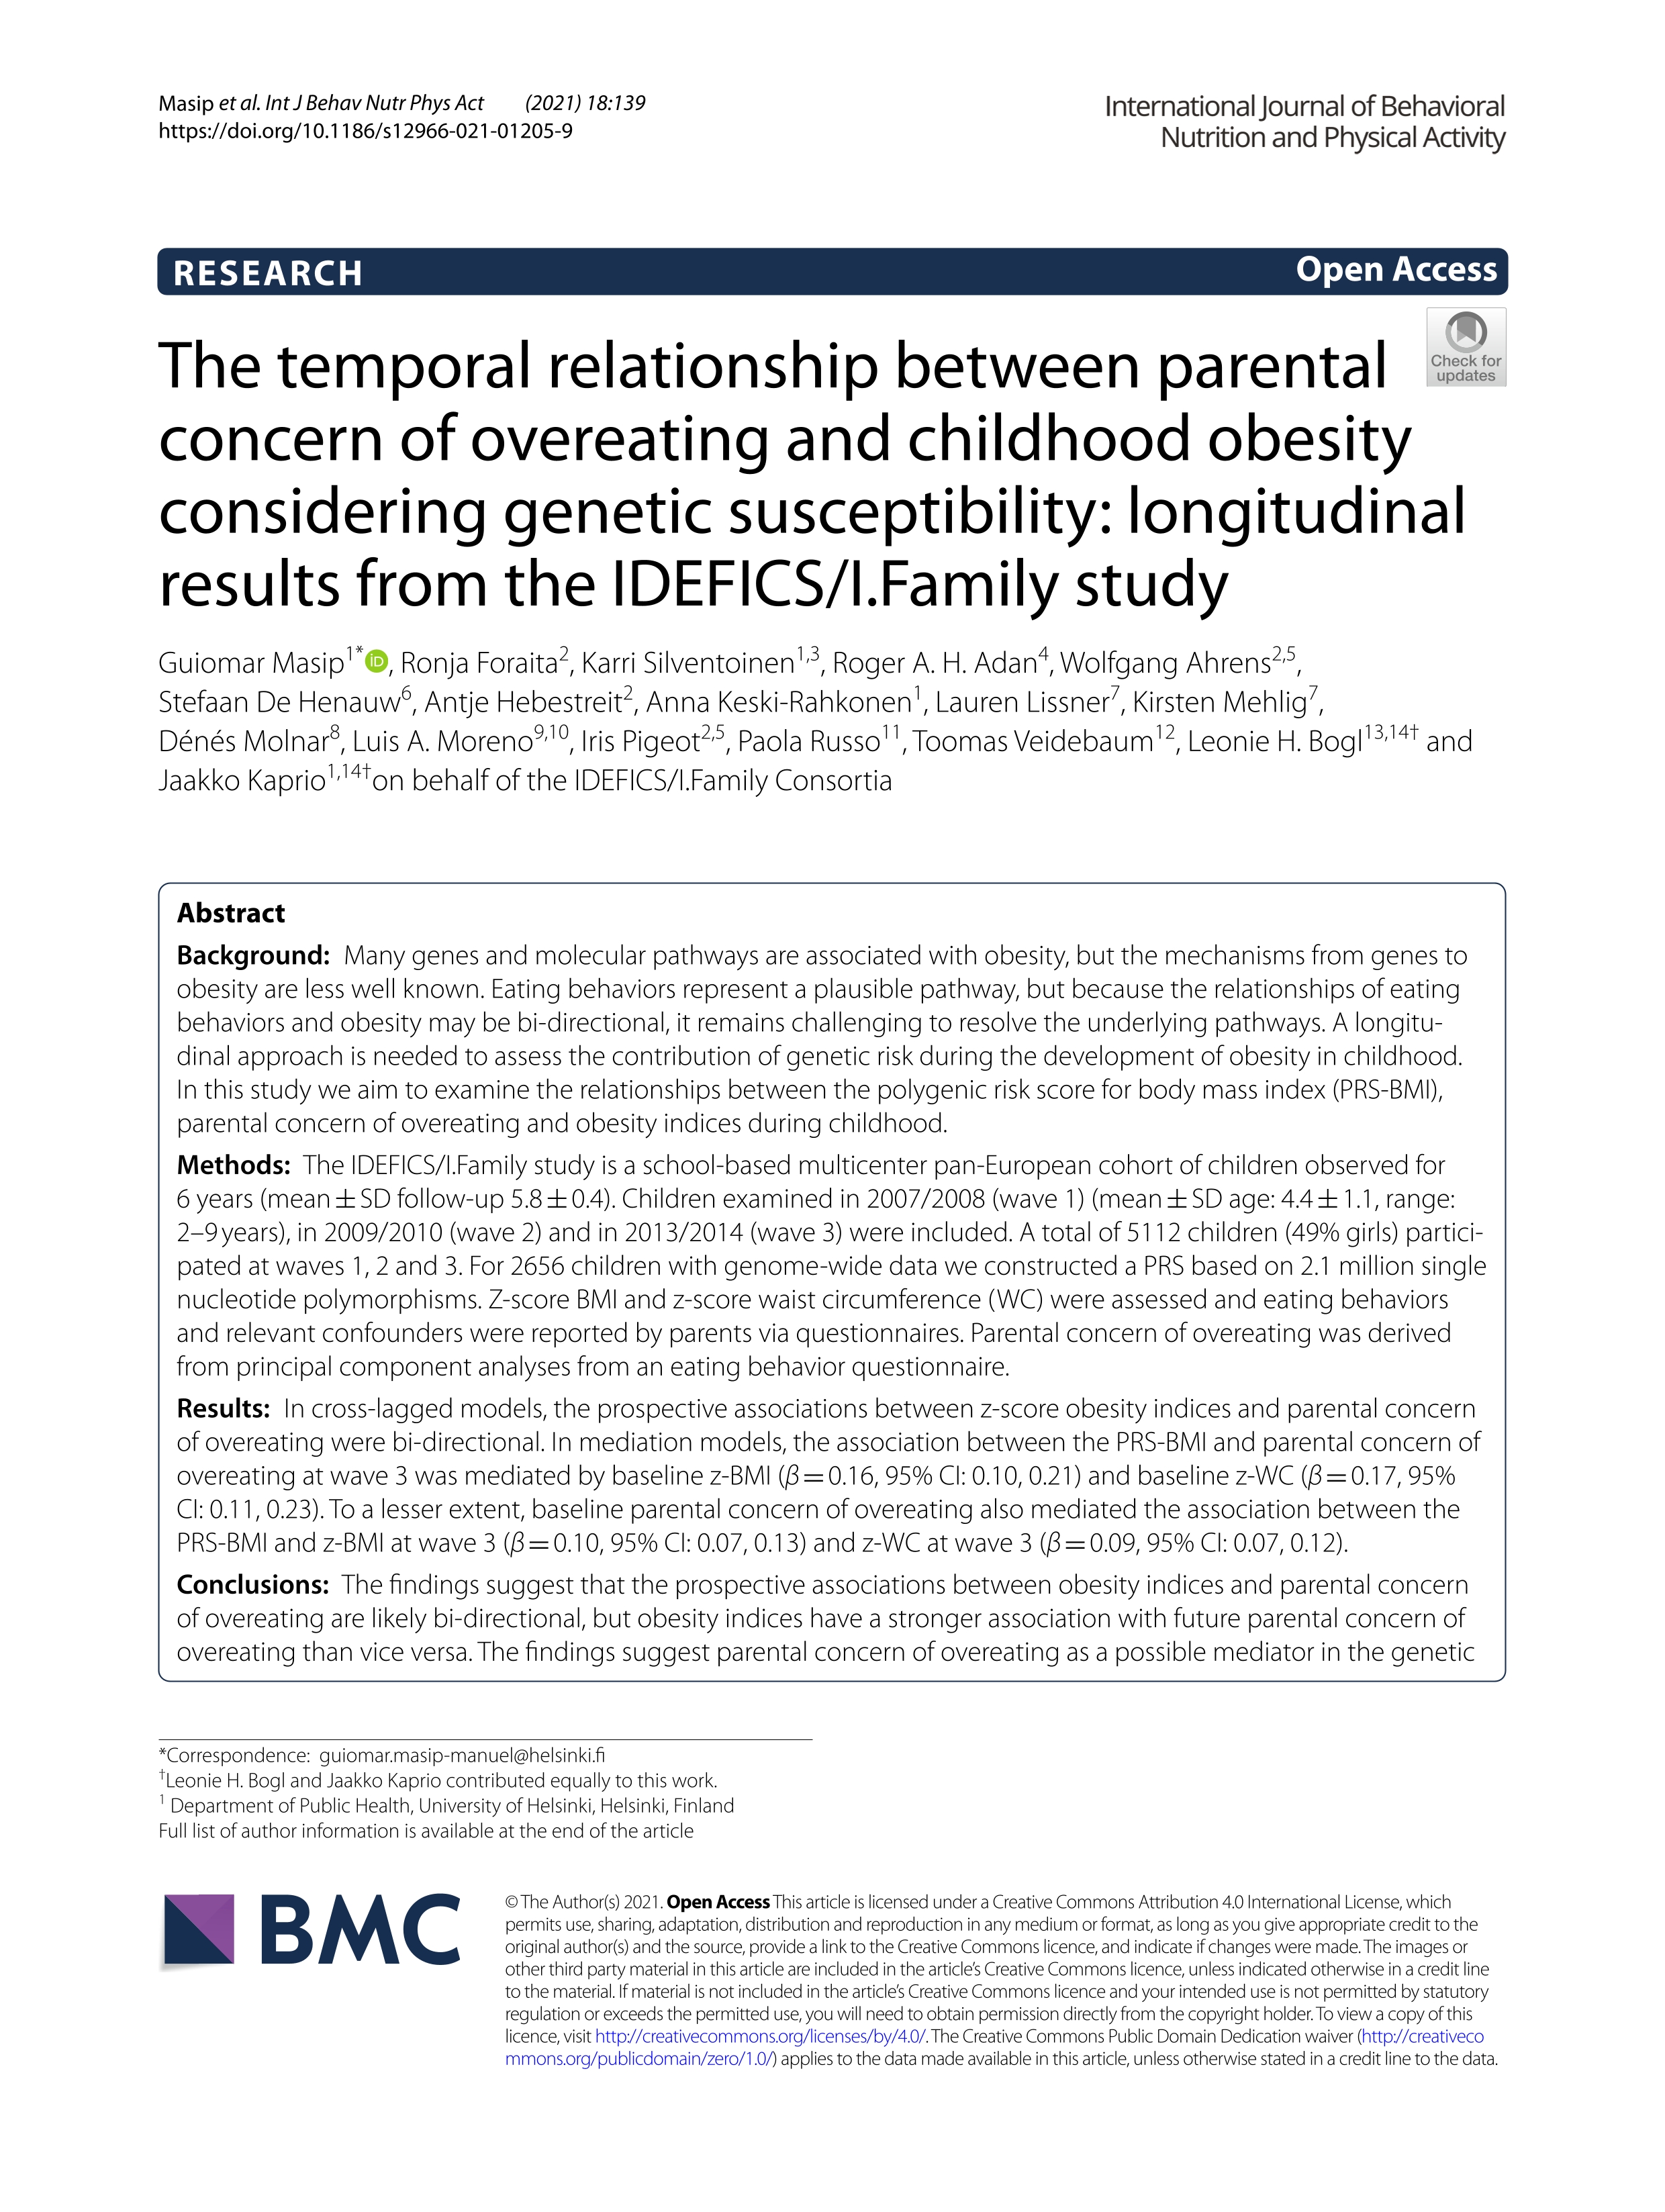 The temporal relationship between parental concern of overeating and childhood obesity considering genetic susceptibility: longitudinal results from the IDEFICS/I.Family study